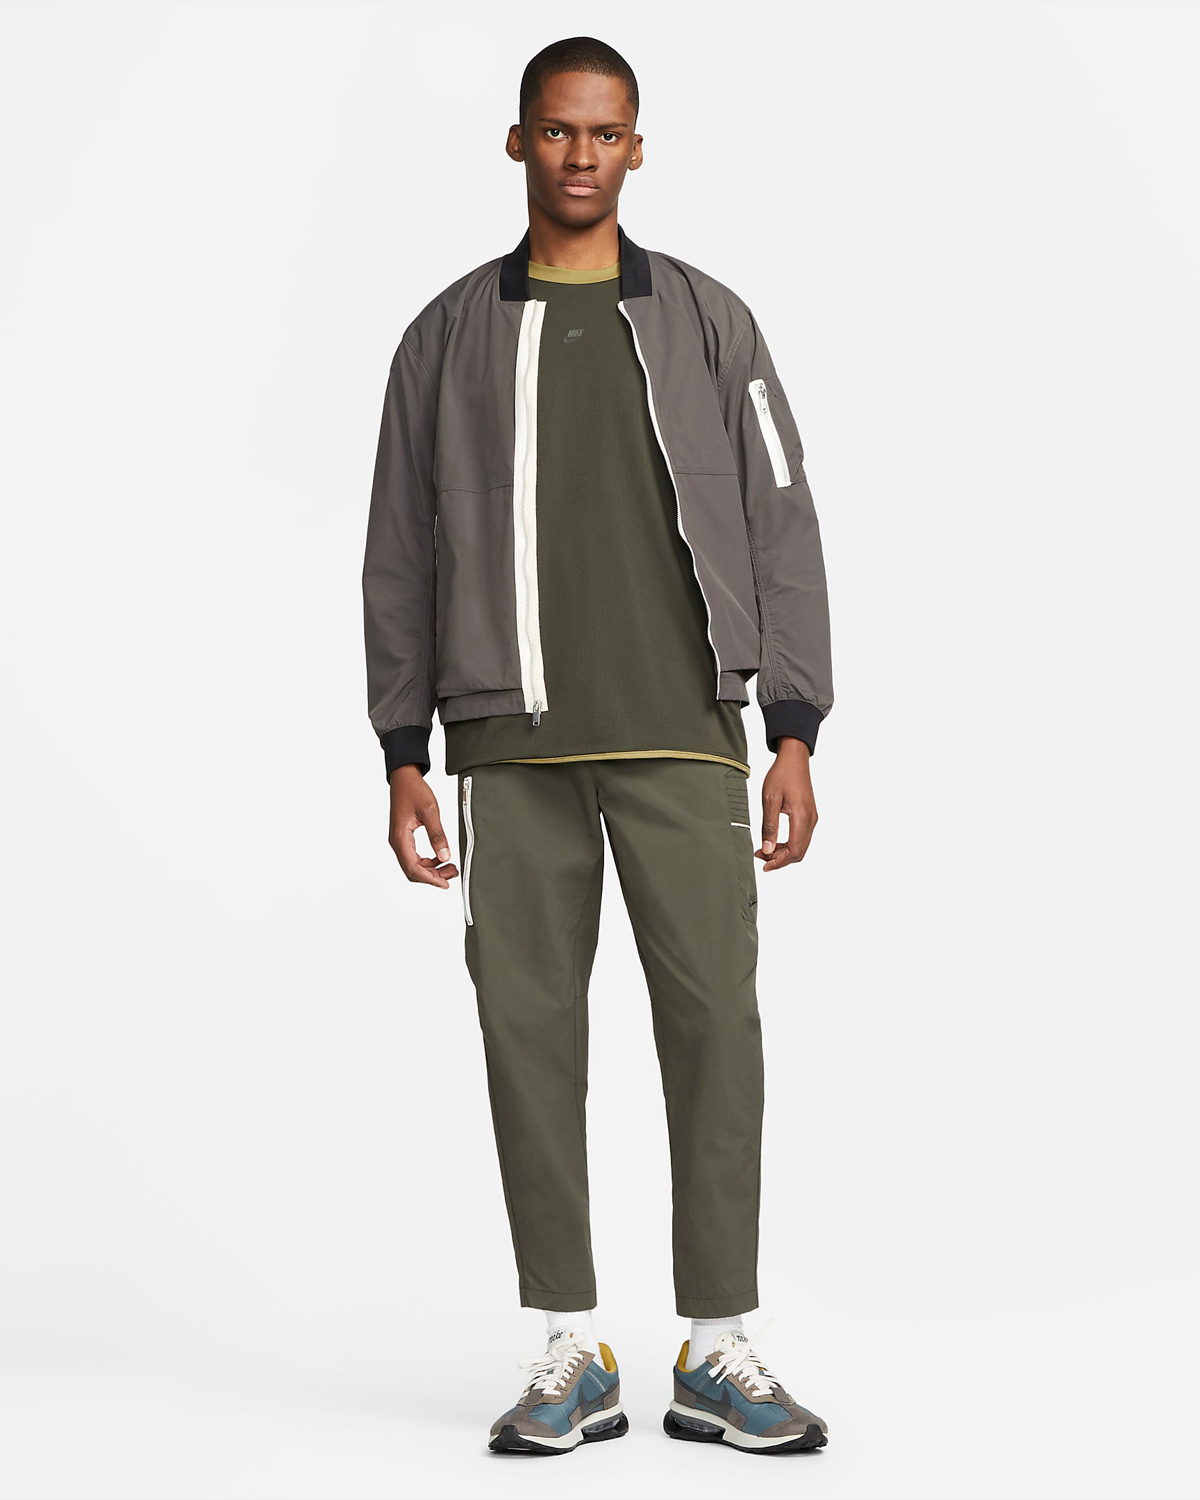 Nike-Sequoia-Clothing-Outfit